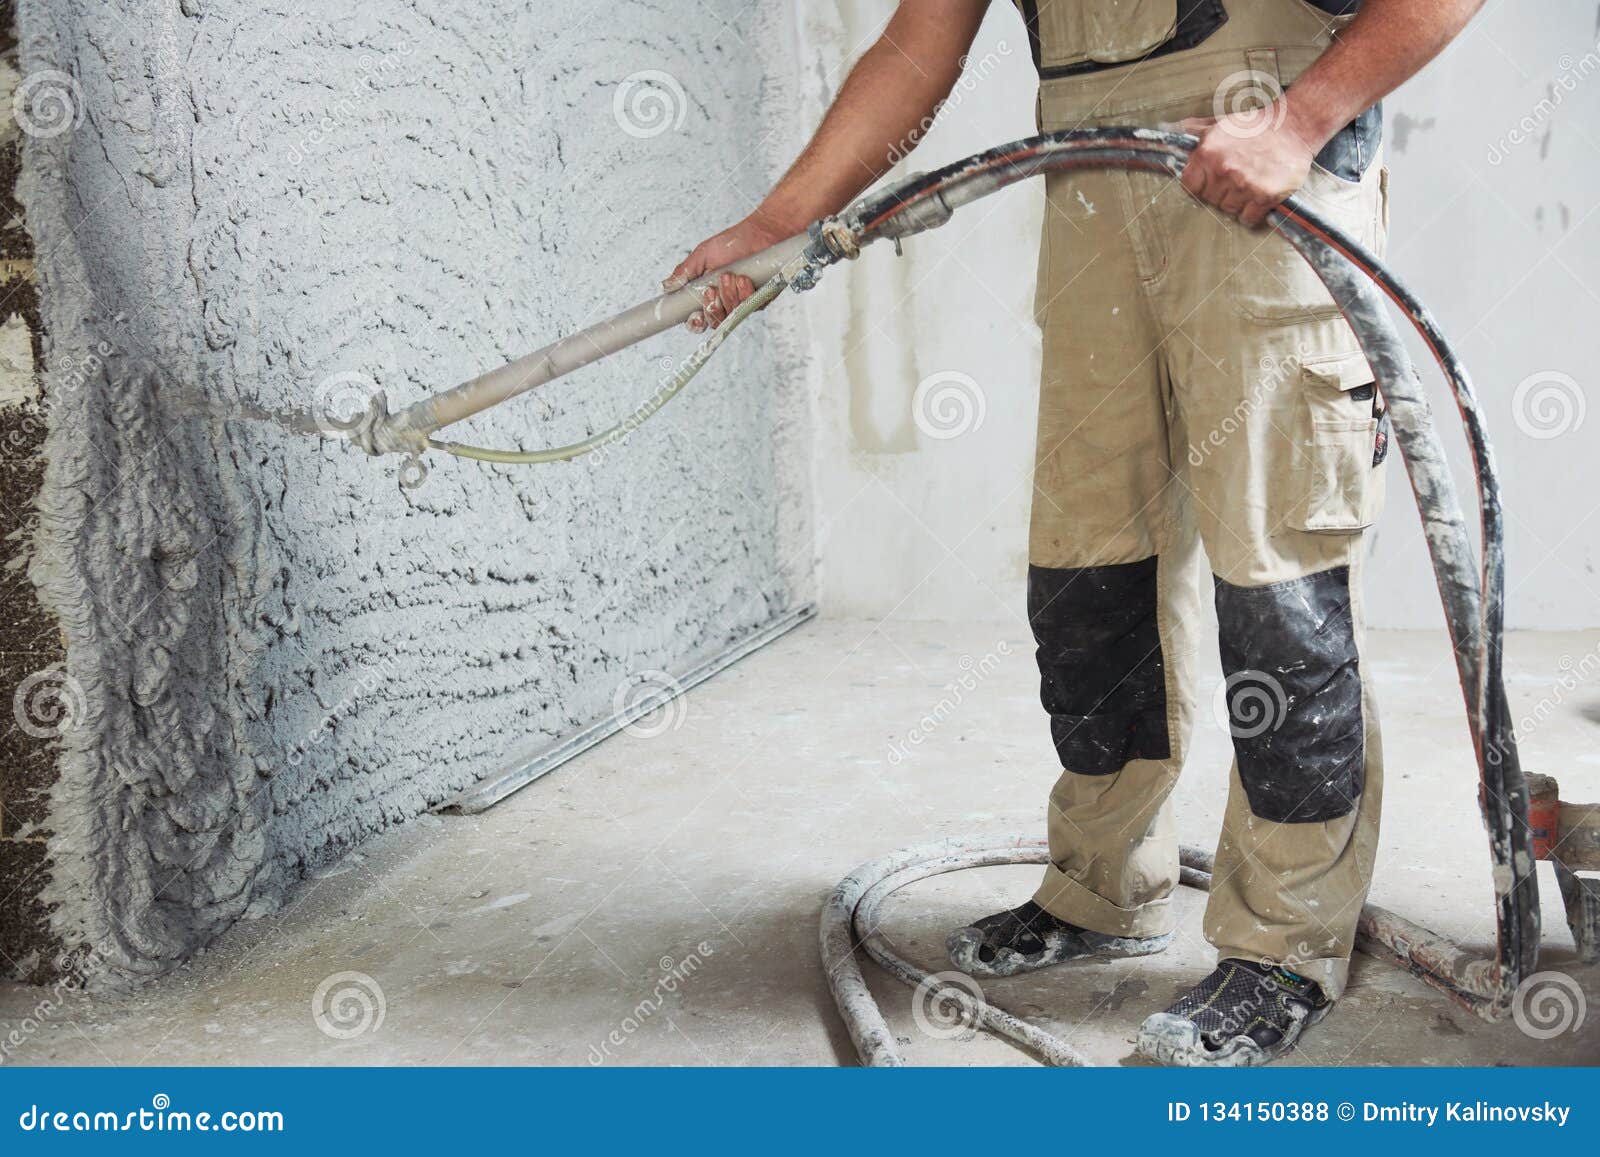 plastering the interior wall with an automatic spraying plaster pump machine